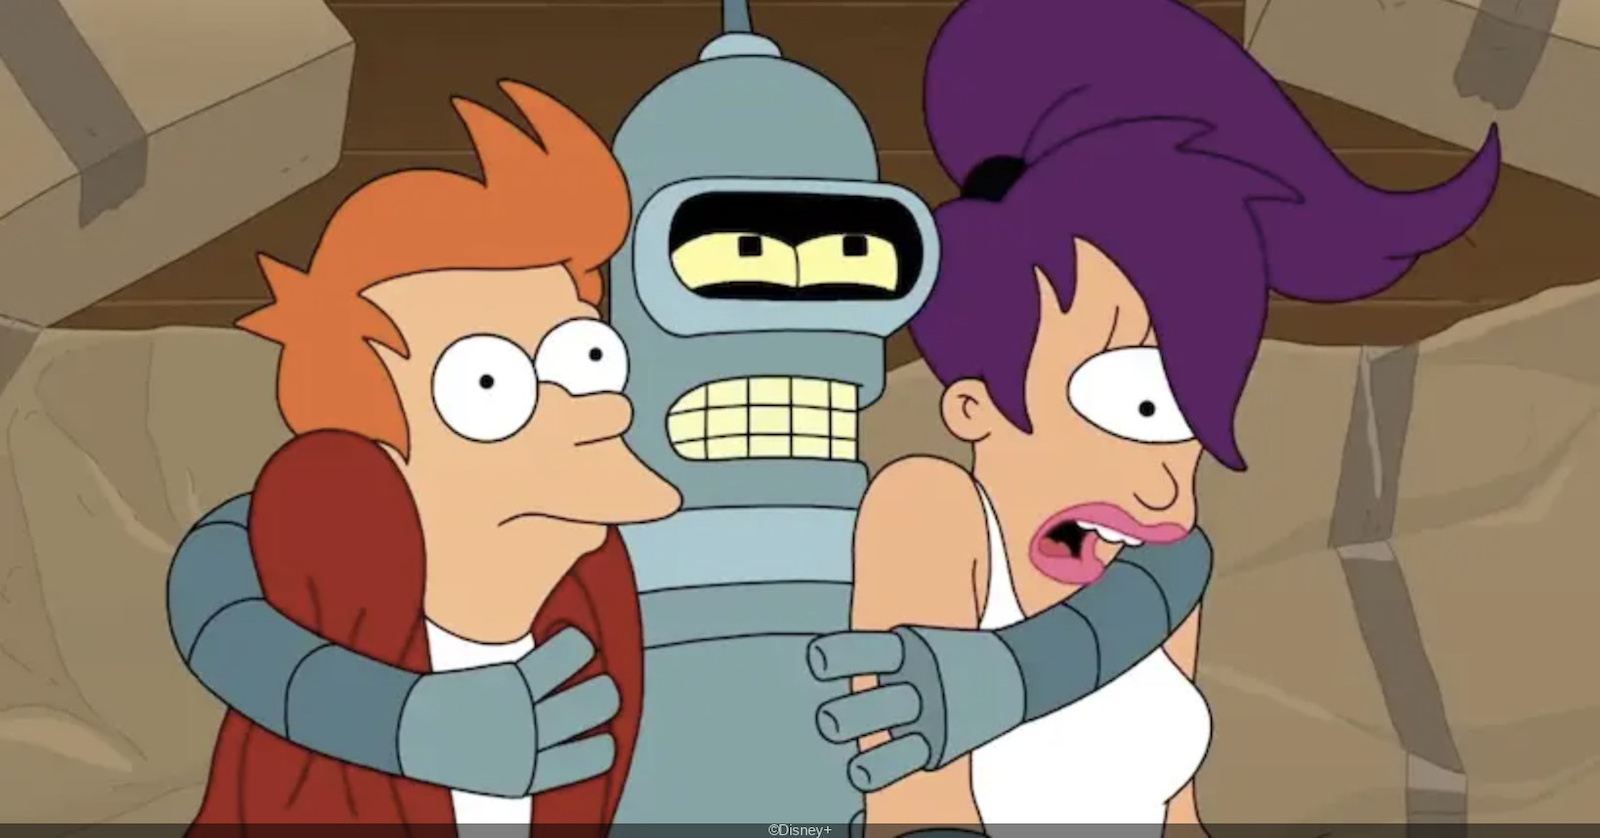 Futurama: Season 11 will arrive on Disney + in Italy, here is the trailer and release date